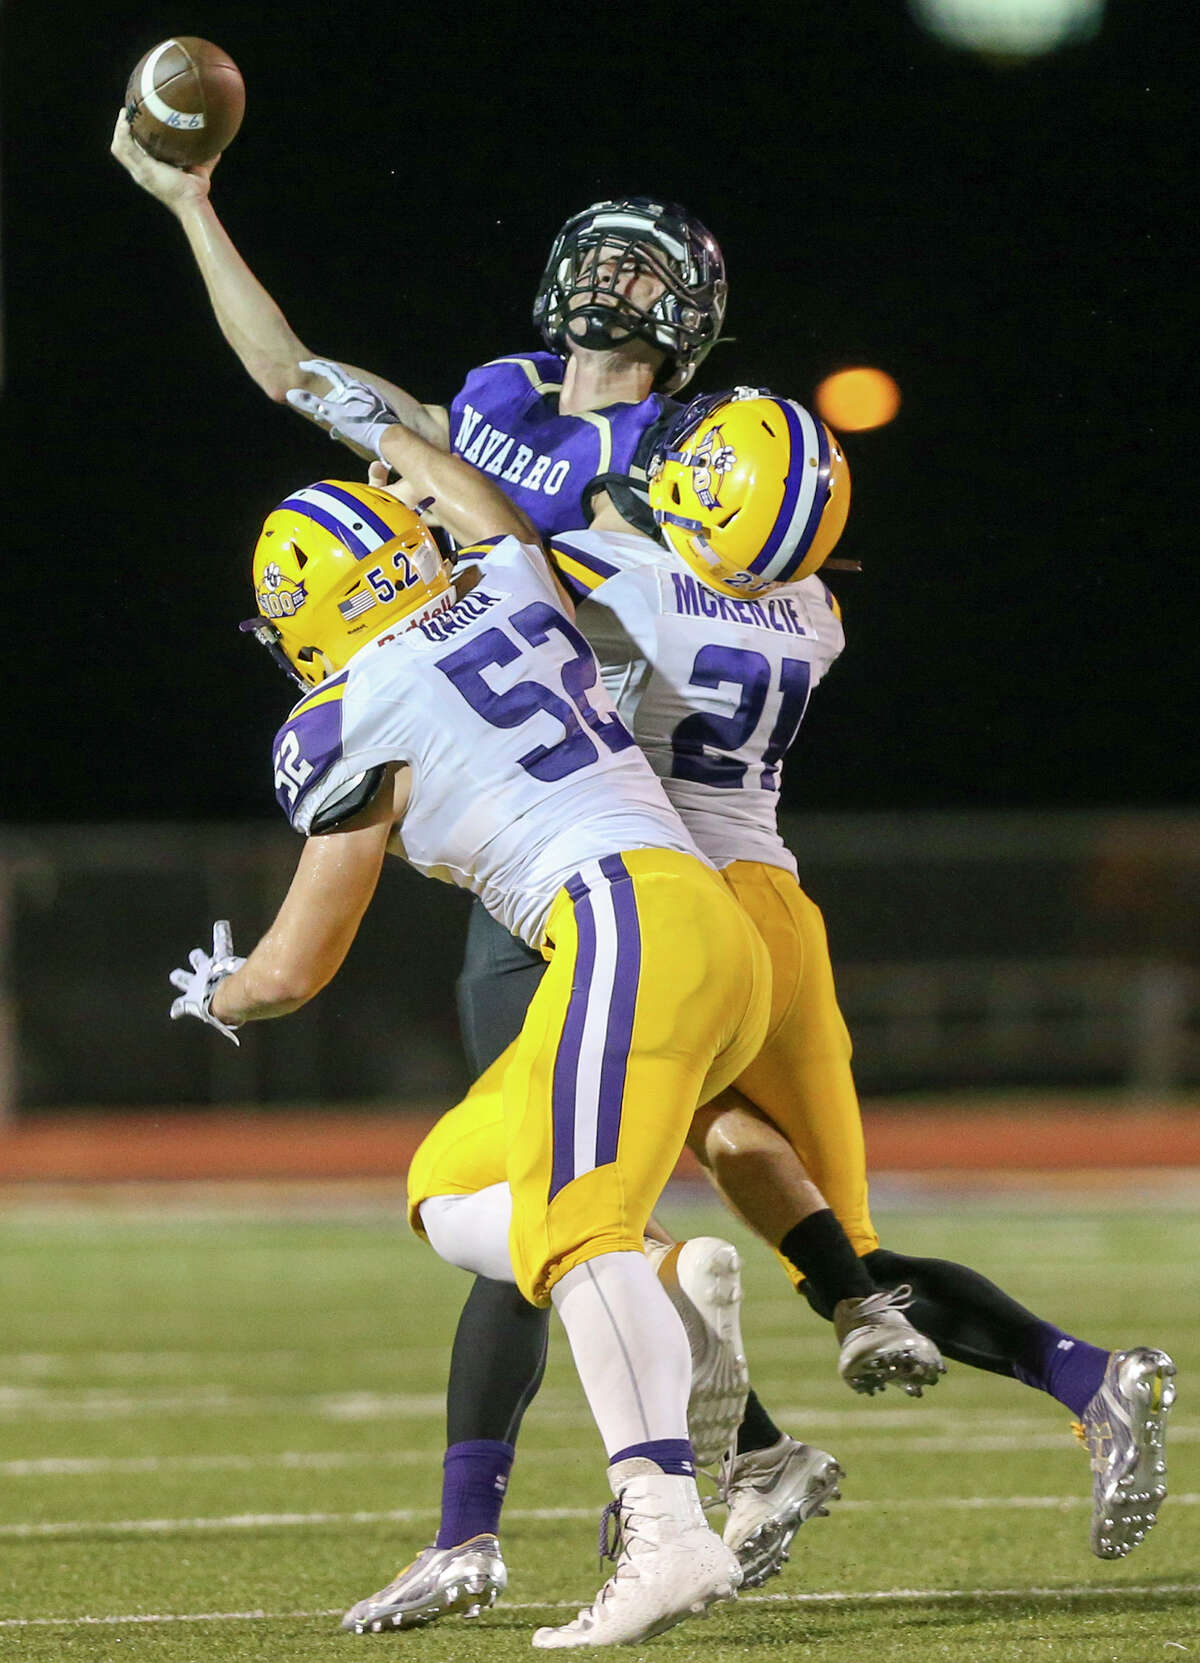 Navarro quarterback Will Eveld tries to pass the ball under pressure from La Grange's Dameon McKenzie (right) and John Garza during the first half of their non-district game at Erwin-Lee Field in Geronimo on Friday, Sept. 16, 2016. MARVIN PFEIFFER/ mpfeiffer@express-news.net